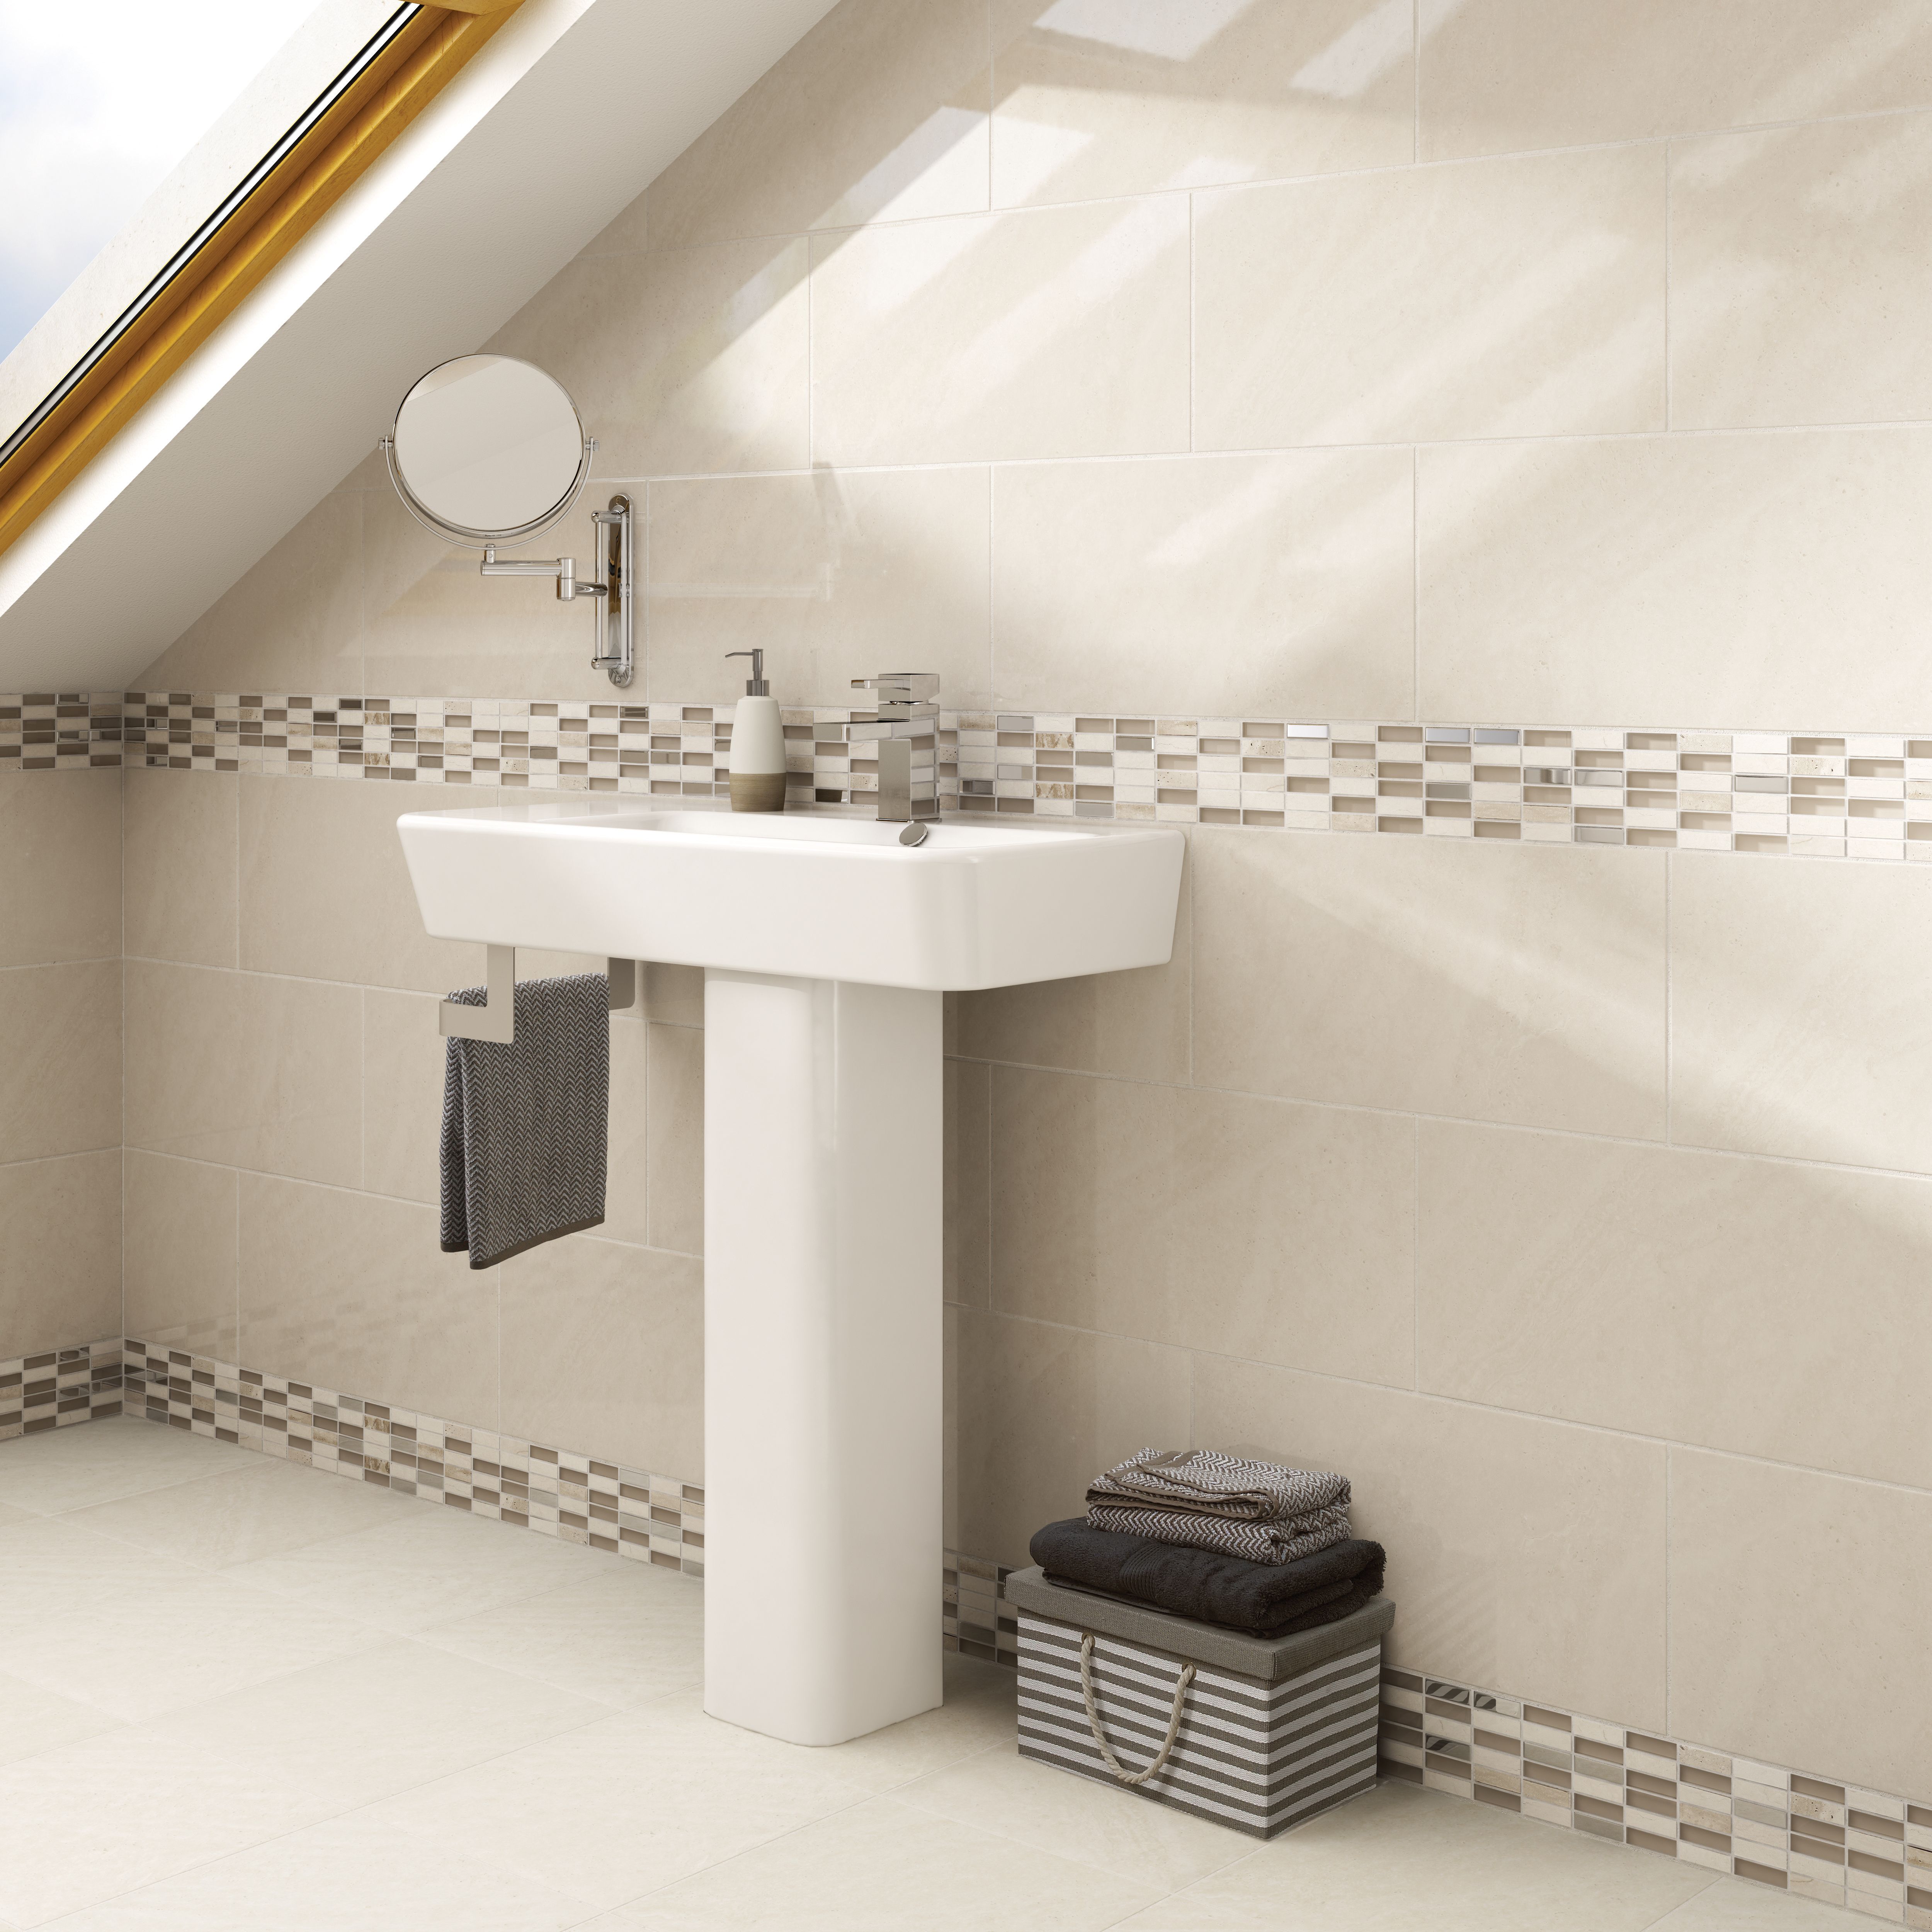 Image of Wickes Delaware Brick Mosaic Tile - 305 x 305mm